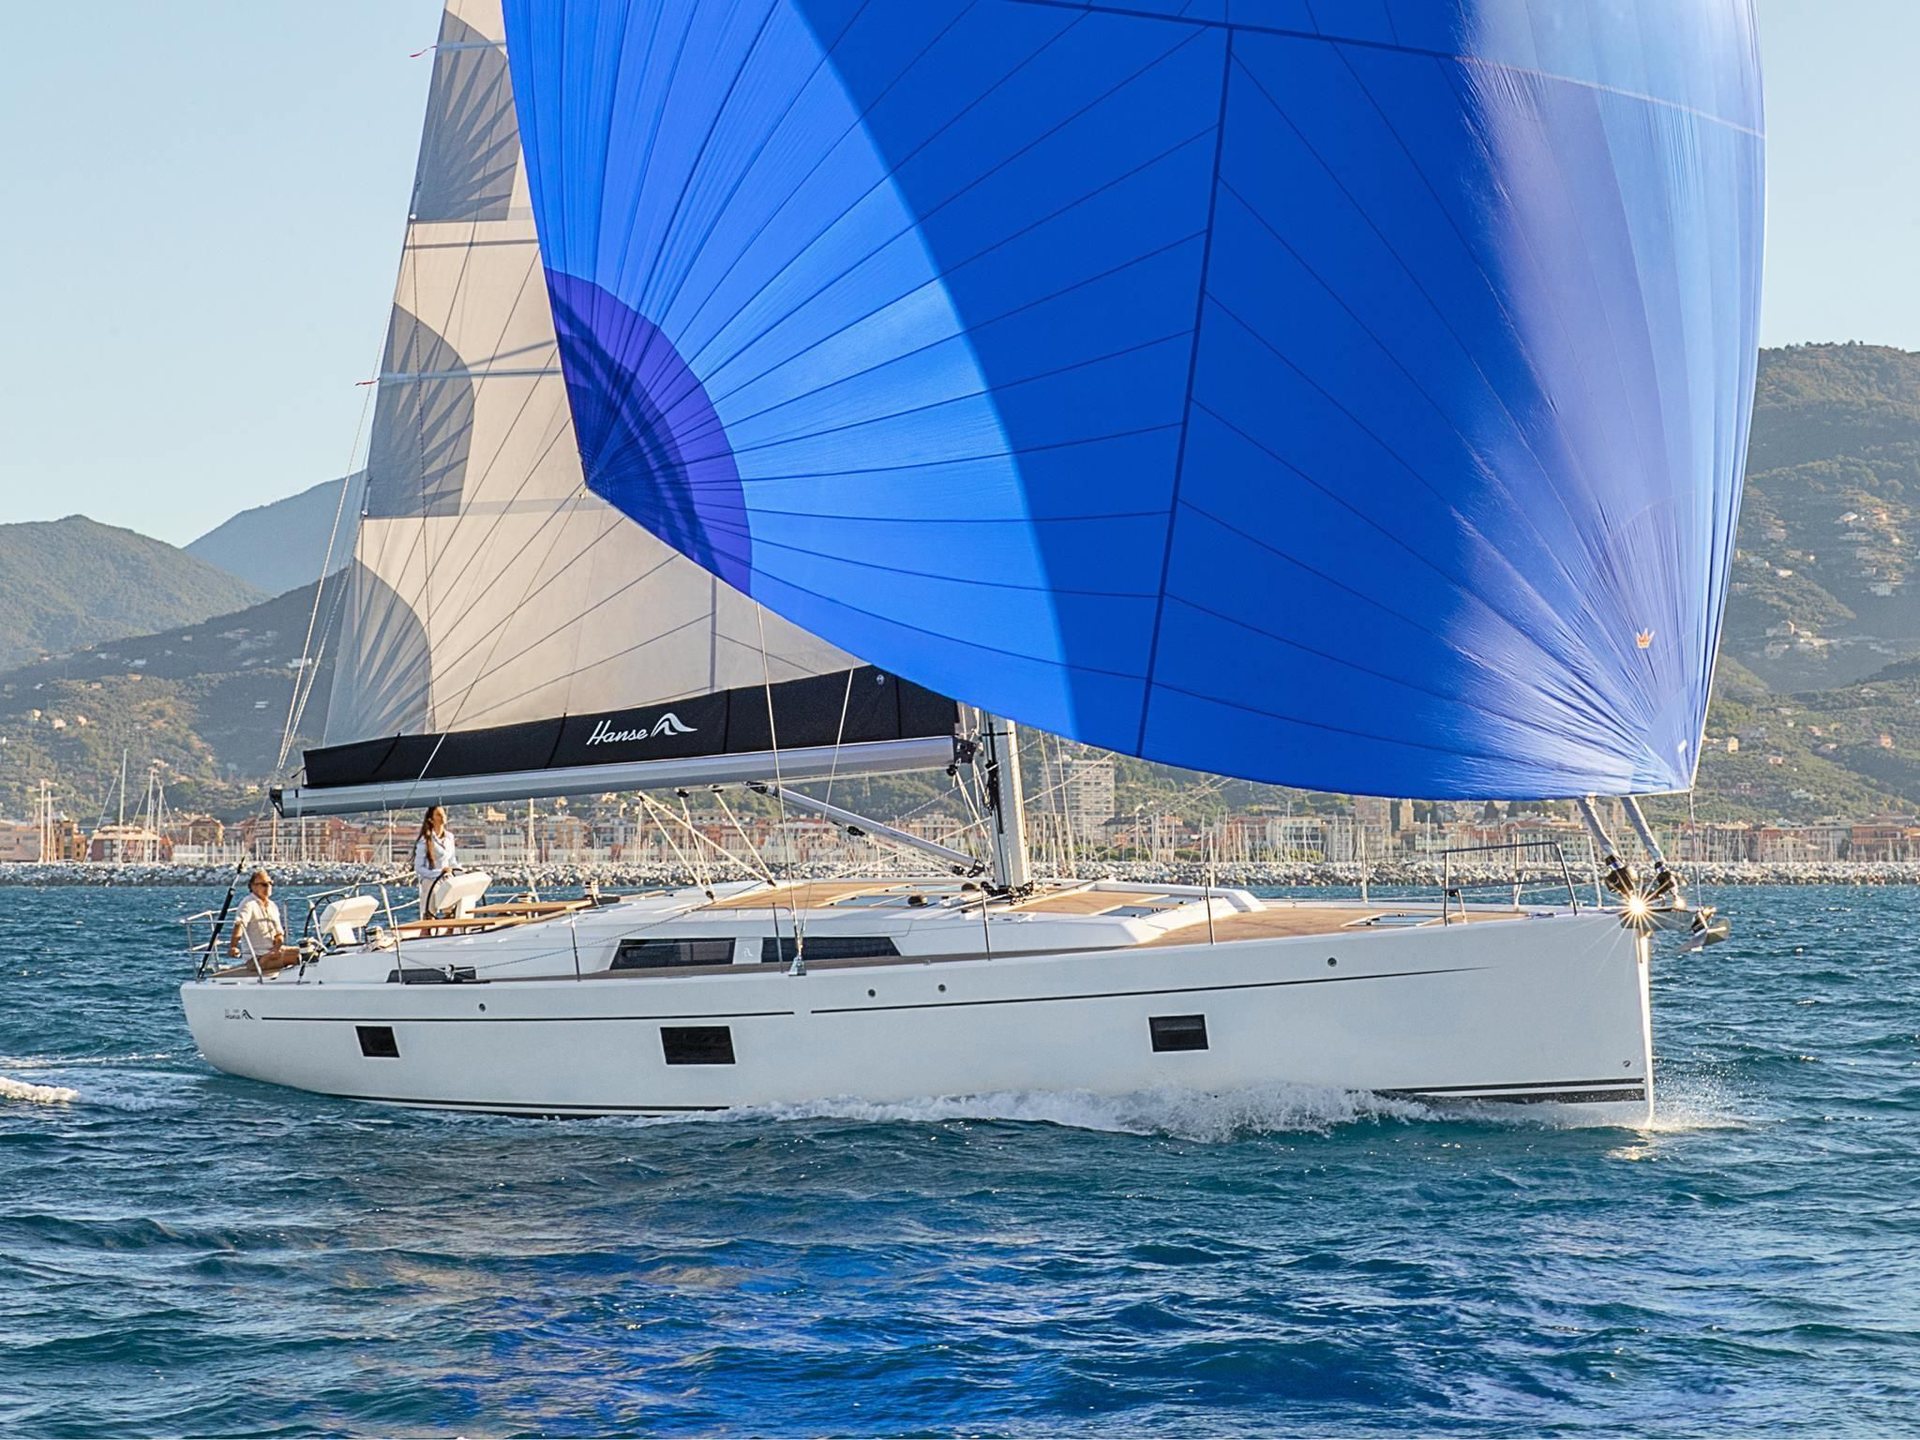 360 VR Virtual Tours of the Hanse 508